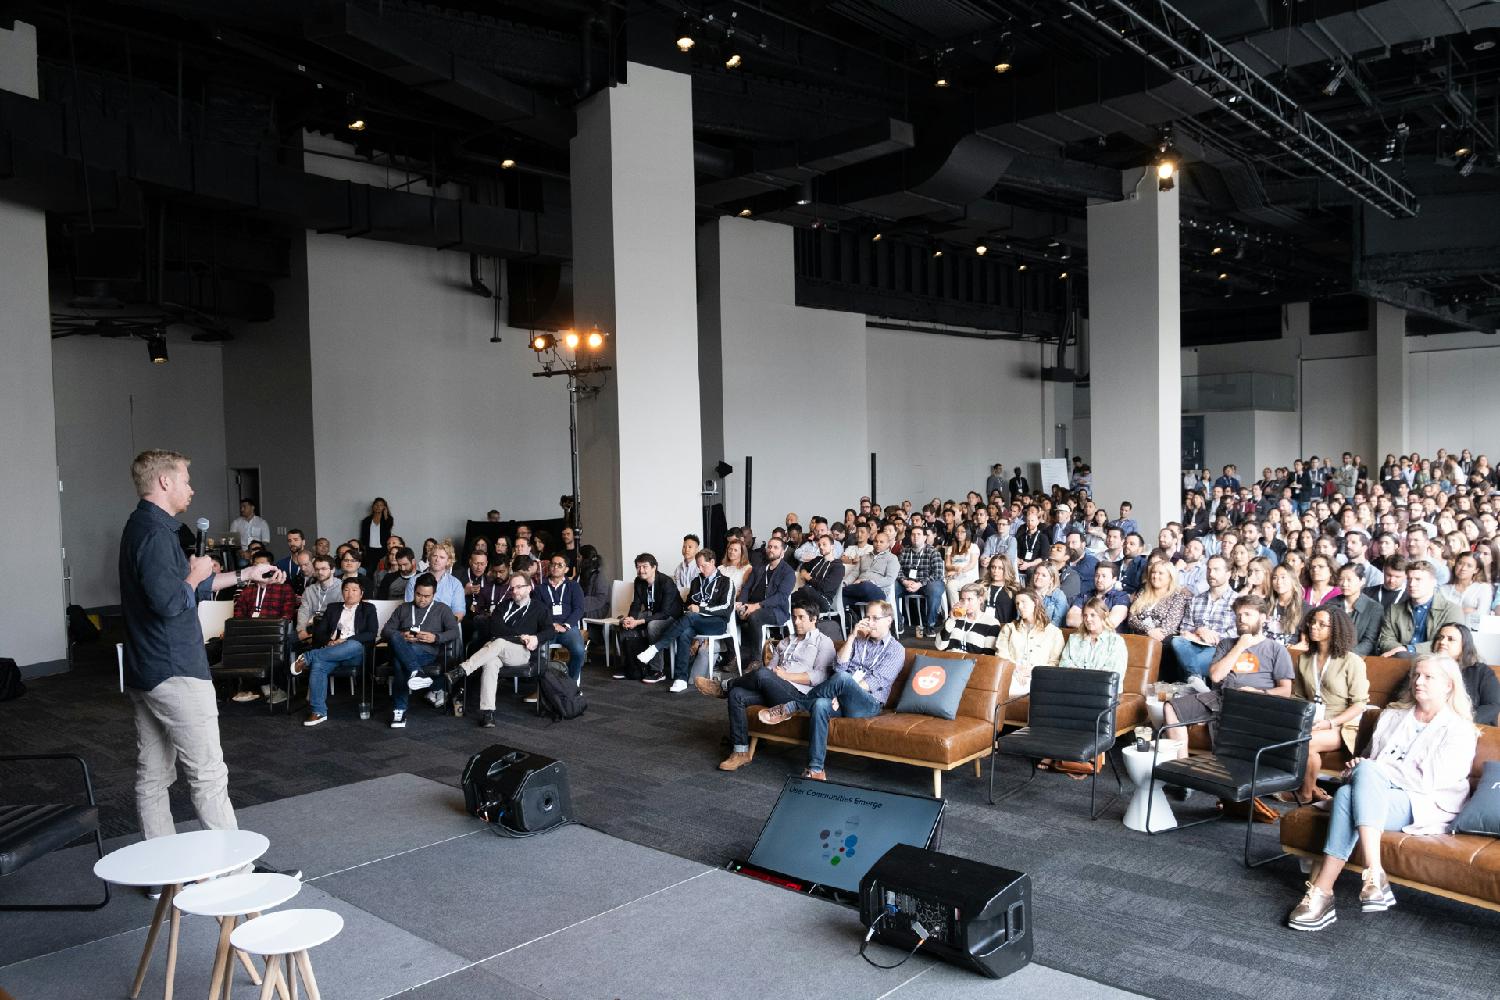 Reddit’s annual Snoo Summit showcases internal talent from every part of the organization and highlights all the amazing work employees have been up to over the past year. 